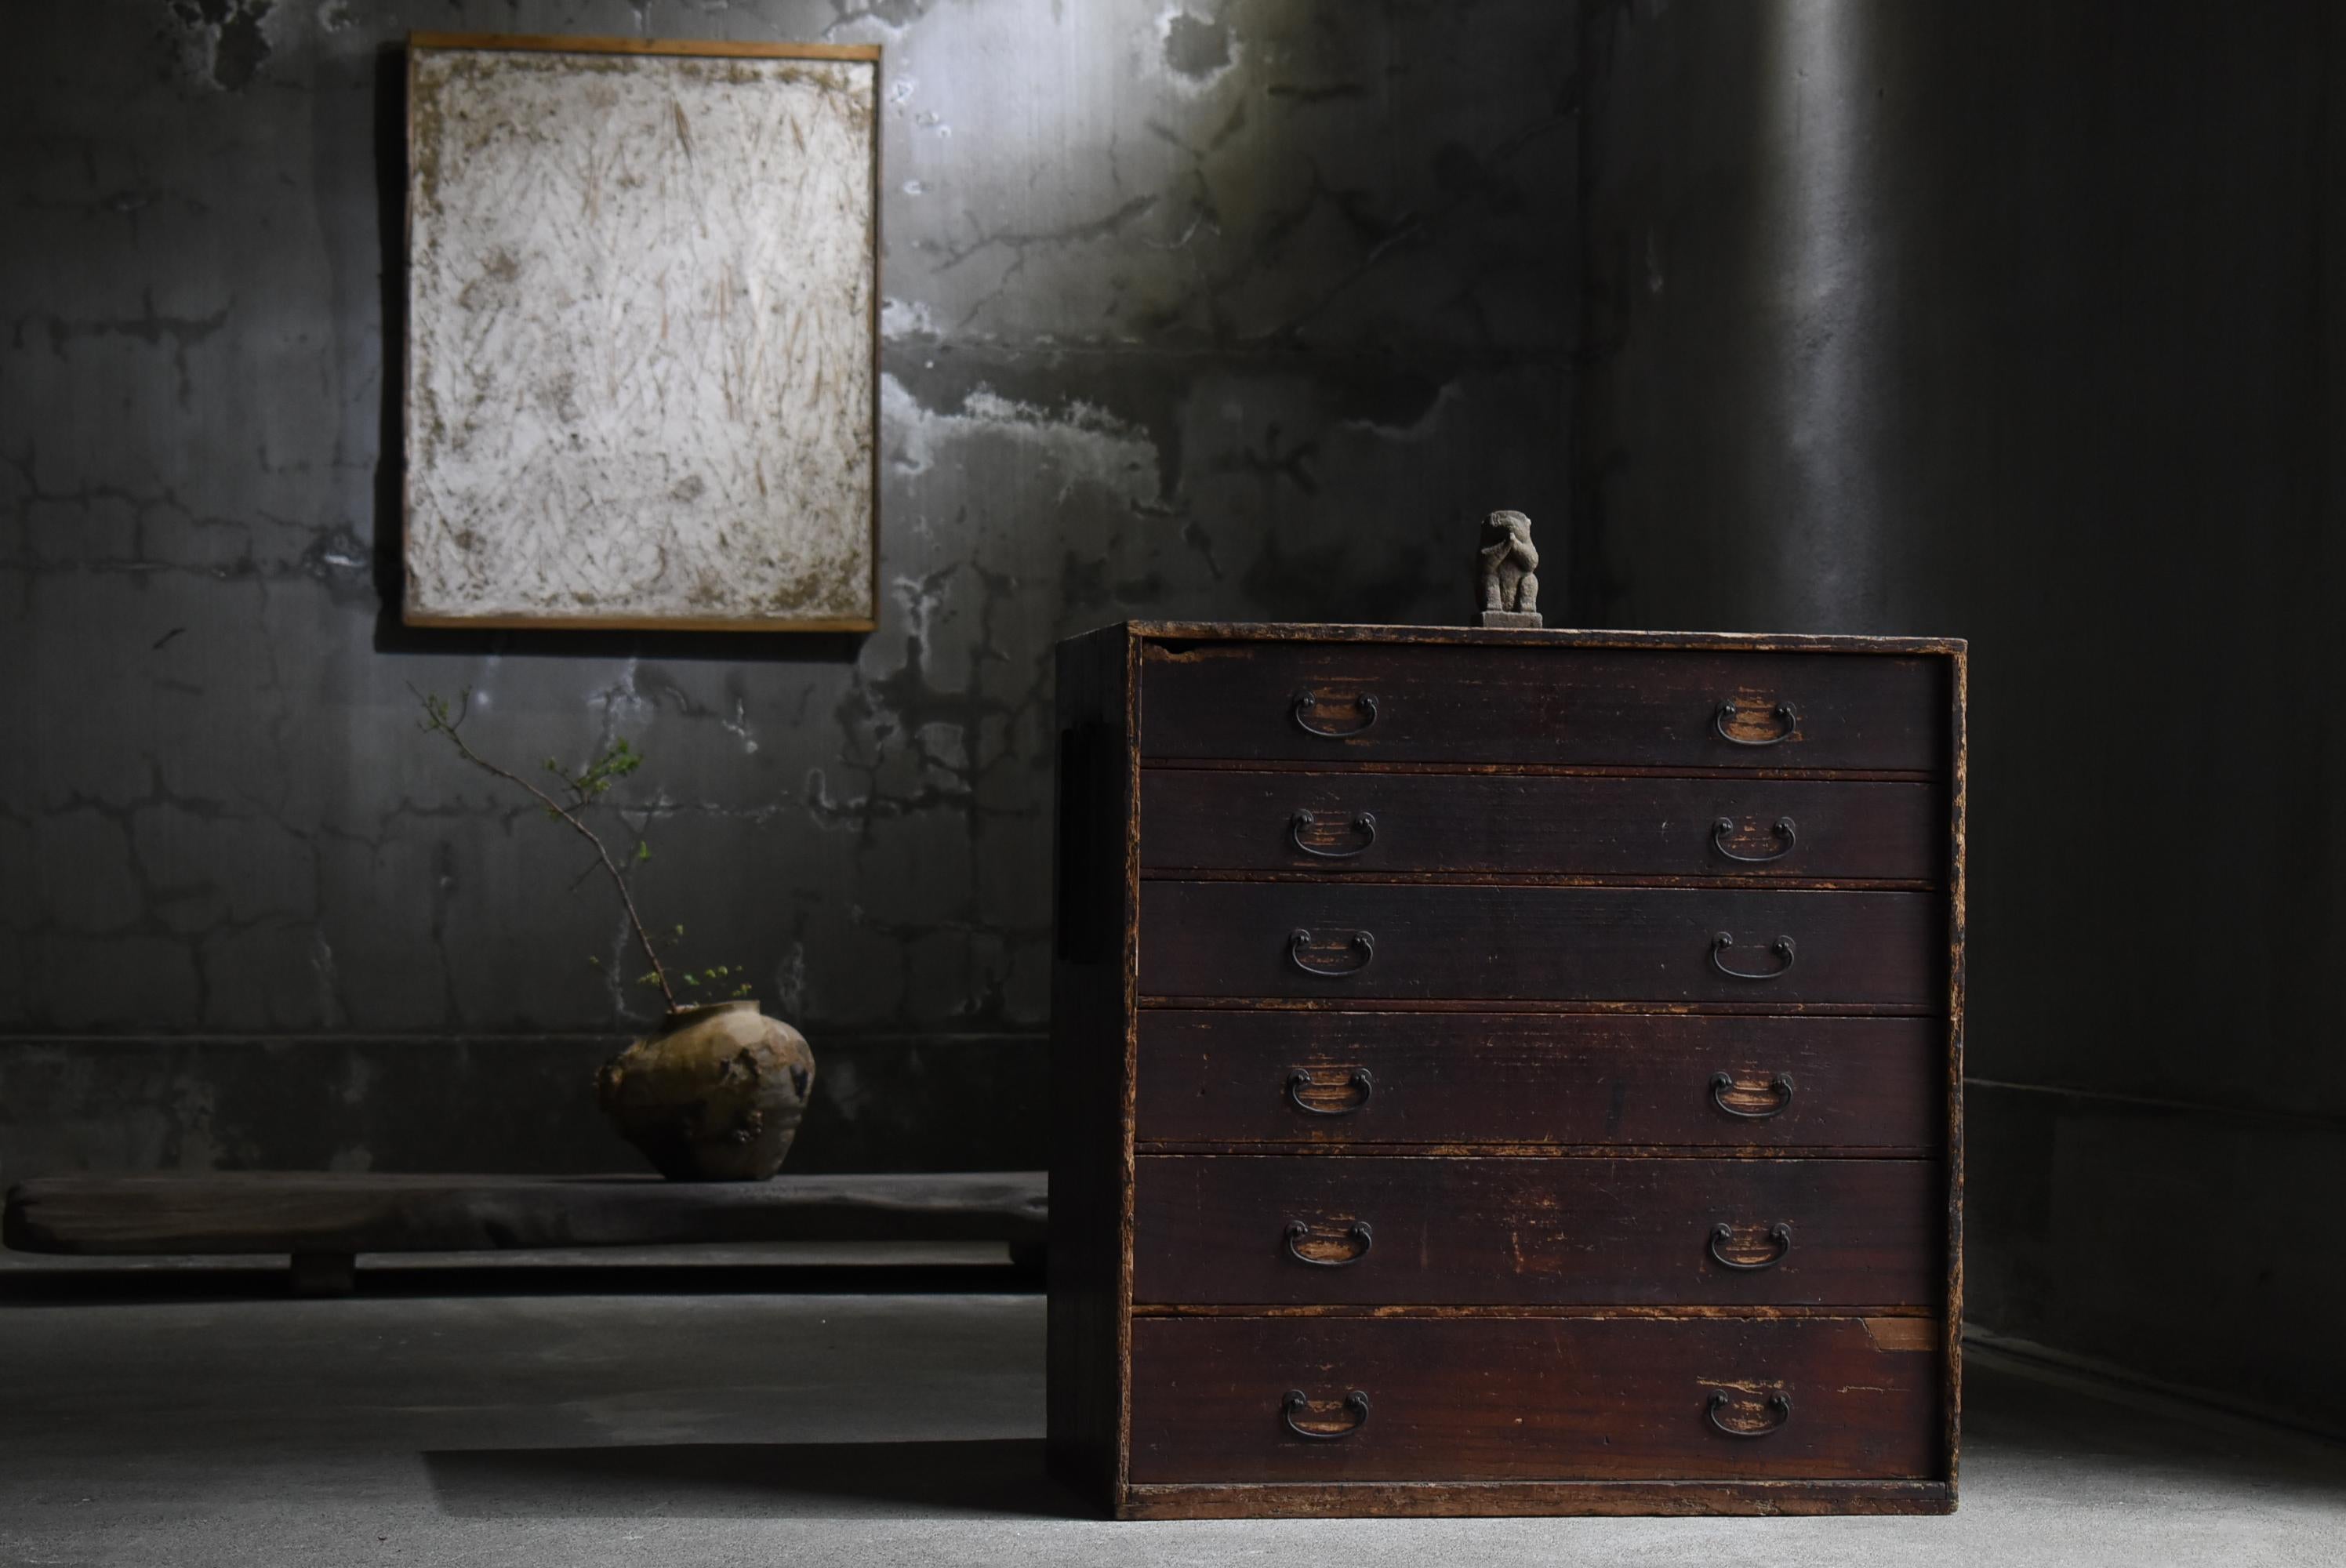 Very old Japanese drawer.
The furniture dates from the Meiji period (1860s-1900s).
It is made of paulownia wood, a high quality material.

These drawers are rustic, simple and beautiful.
There is no waste in the design.
It is the ultimate in